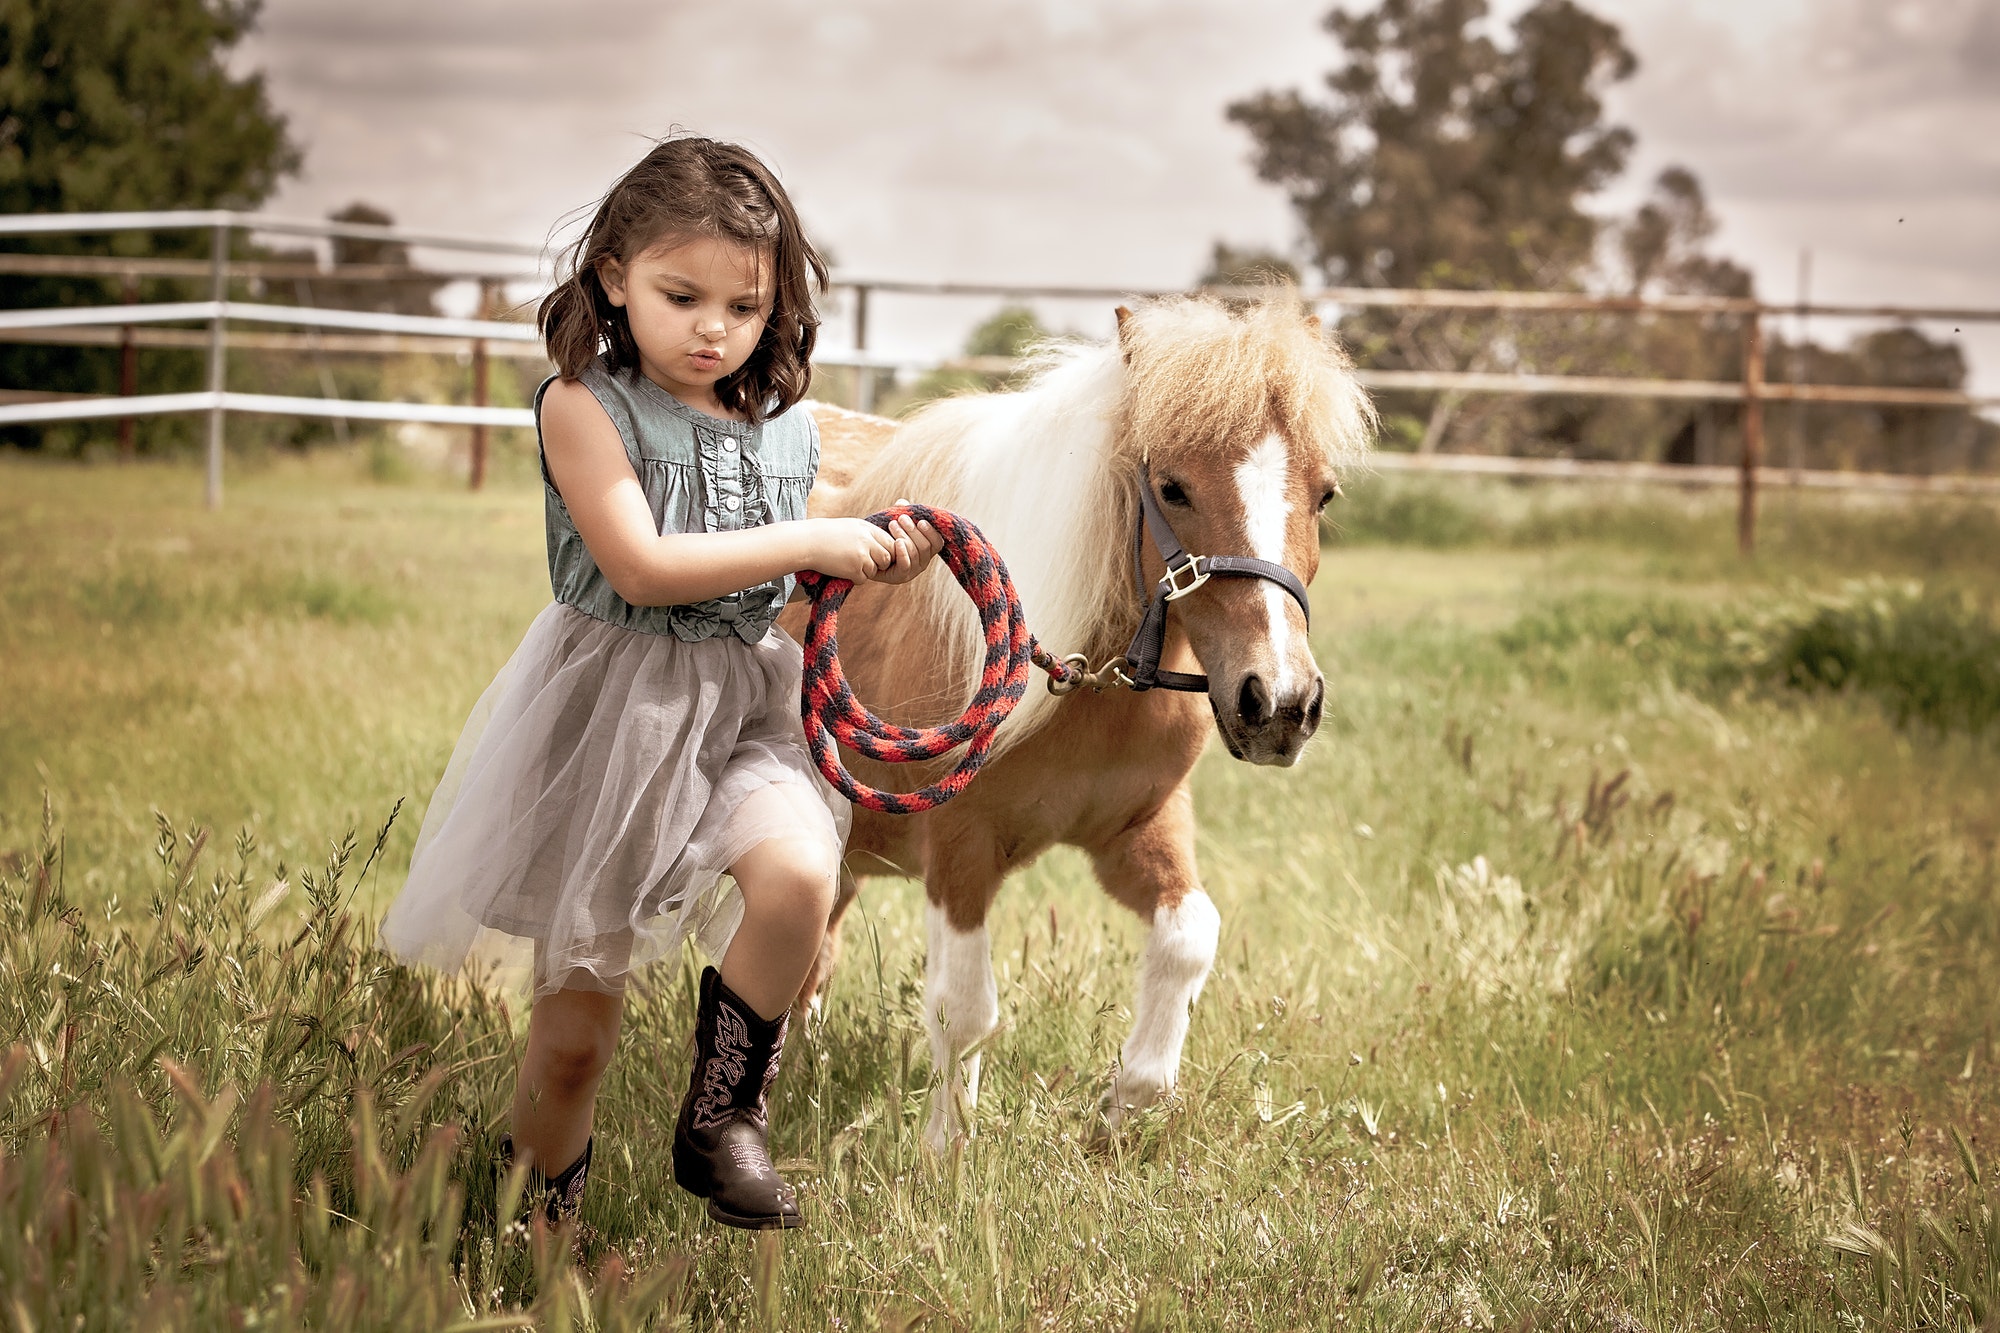 Best Friends. A girl and her pony getting exercise.